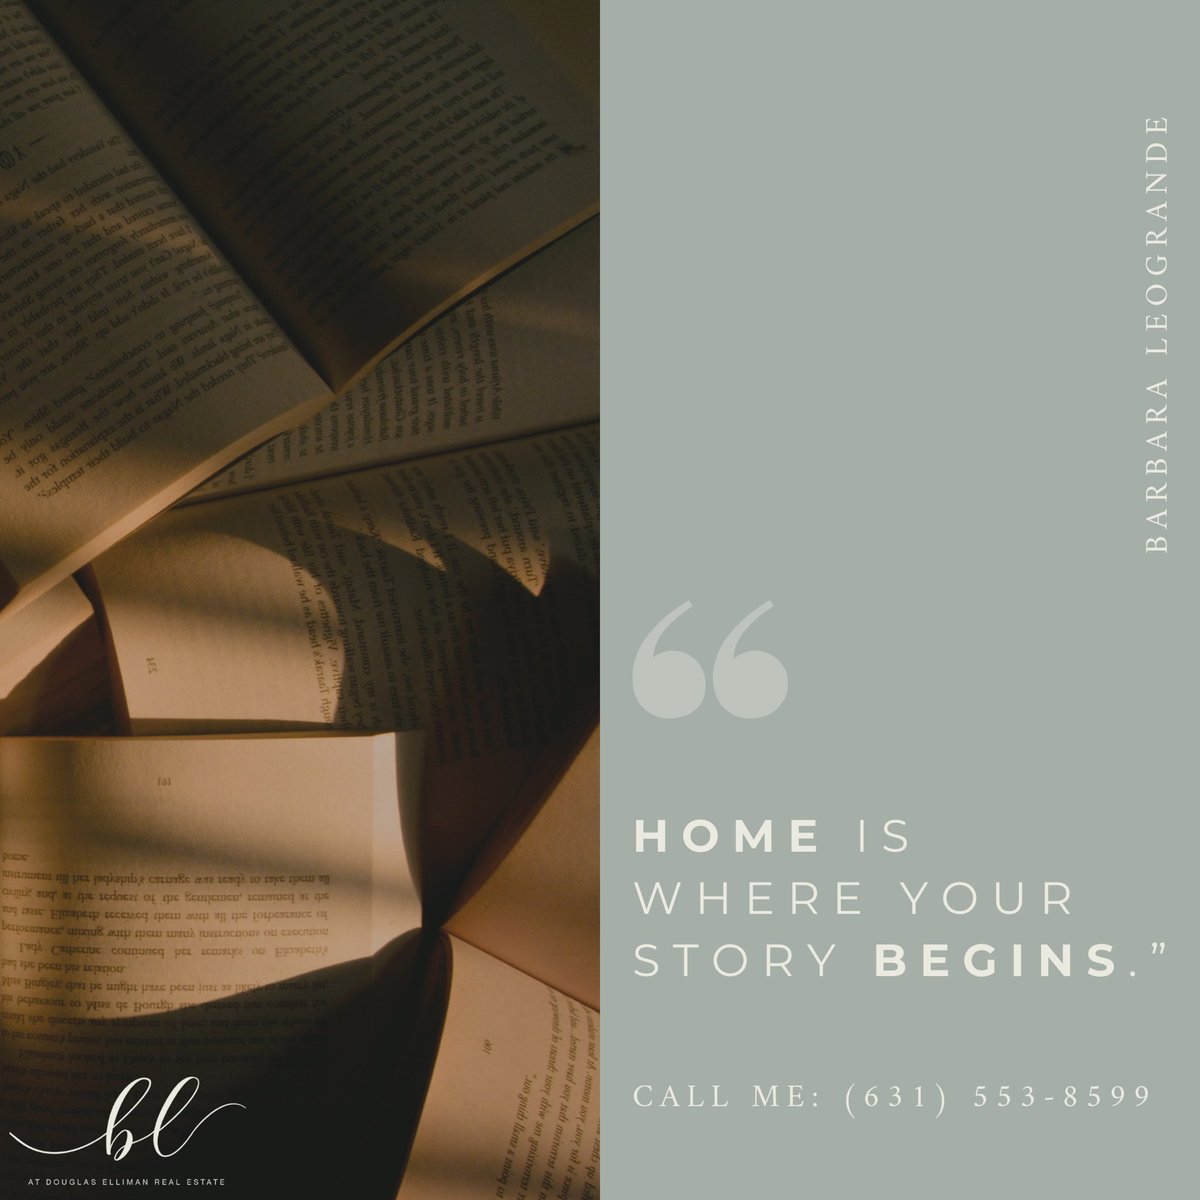 Let the next chapter unfold! ❤️ #CallBarbara 🏠
.
.
.
.
#SoldByBarbara #CallBarbara #ILoveWhatIDo #ListenToYourBroker #ListWithMe #BuyWithMe #DouglasElliman #DouglasEllimanRealEstate #DE #EllimanAgents #EllimanLI #LongIsland #SouthShore #RealEstate #Realtor #RealtorLife